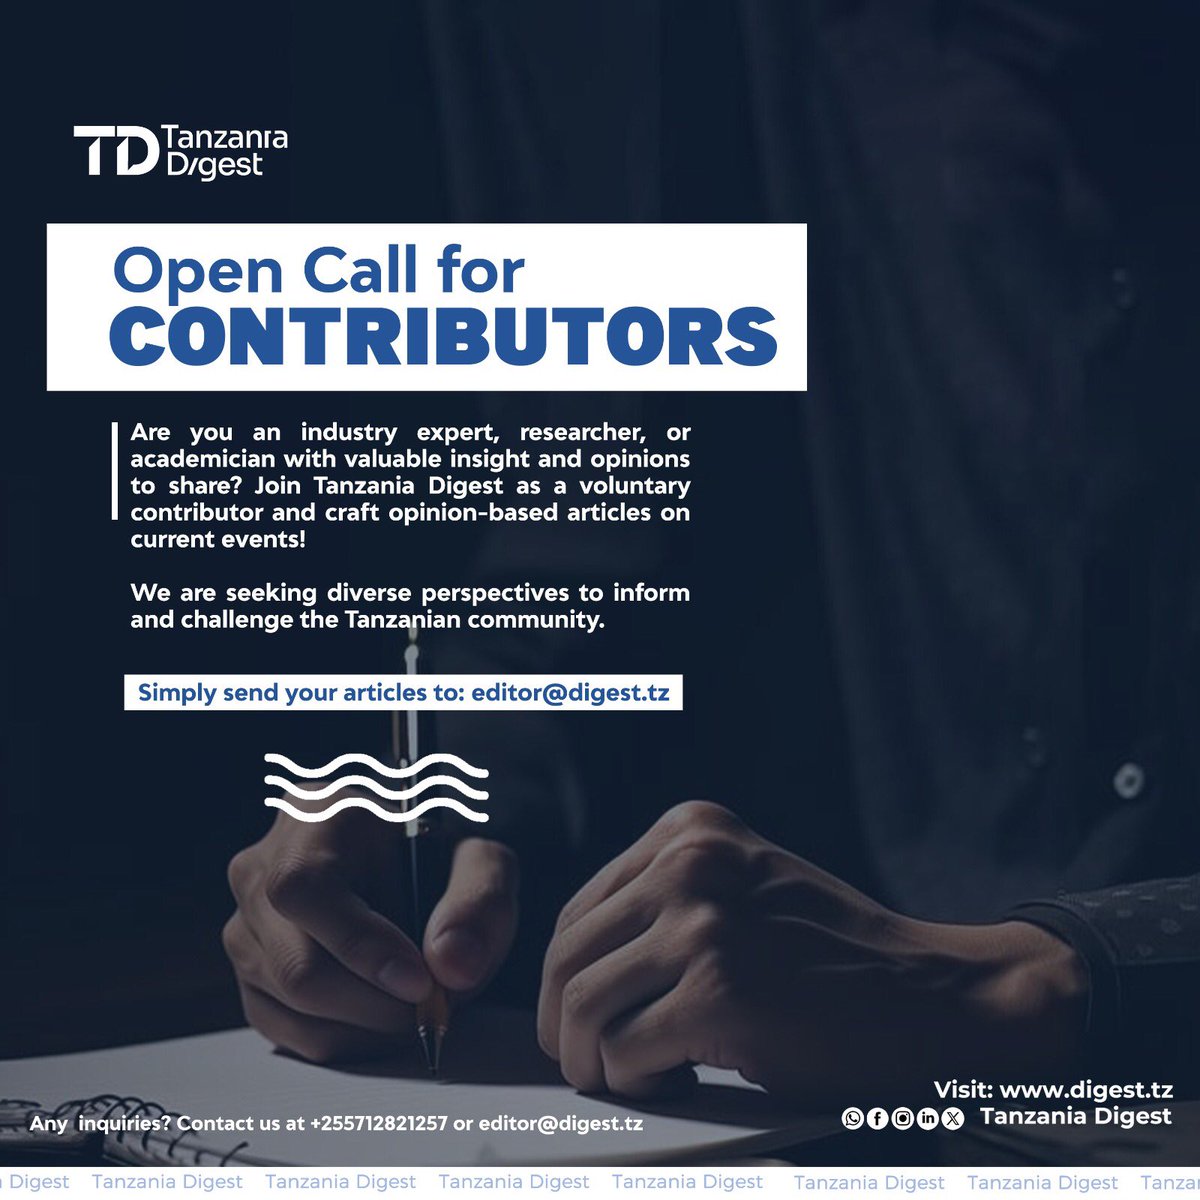 Are you an industry expert, researcher, or academician with valuable insight and opinions to share? Join Tanzania Digest as a voluntary contributor and craft opinion-based articles on current events! Simply send your articles to editor@digest.tz